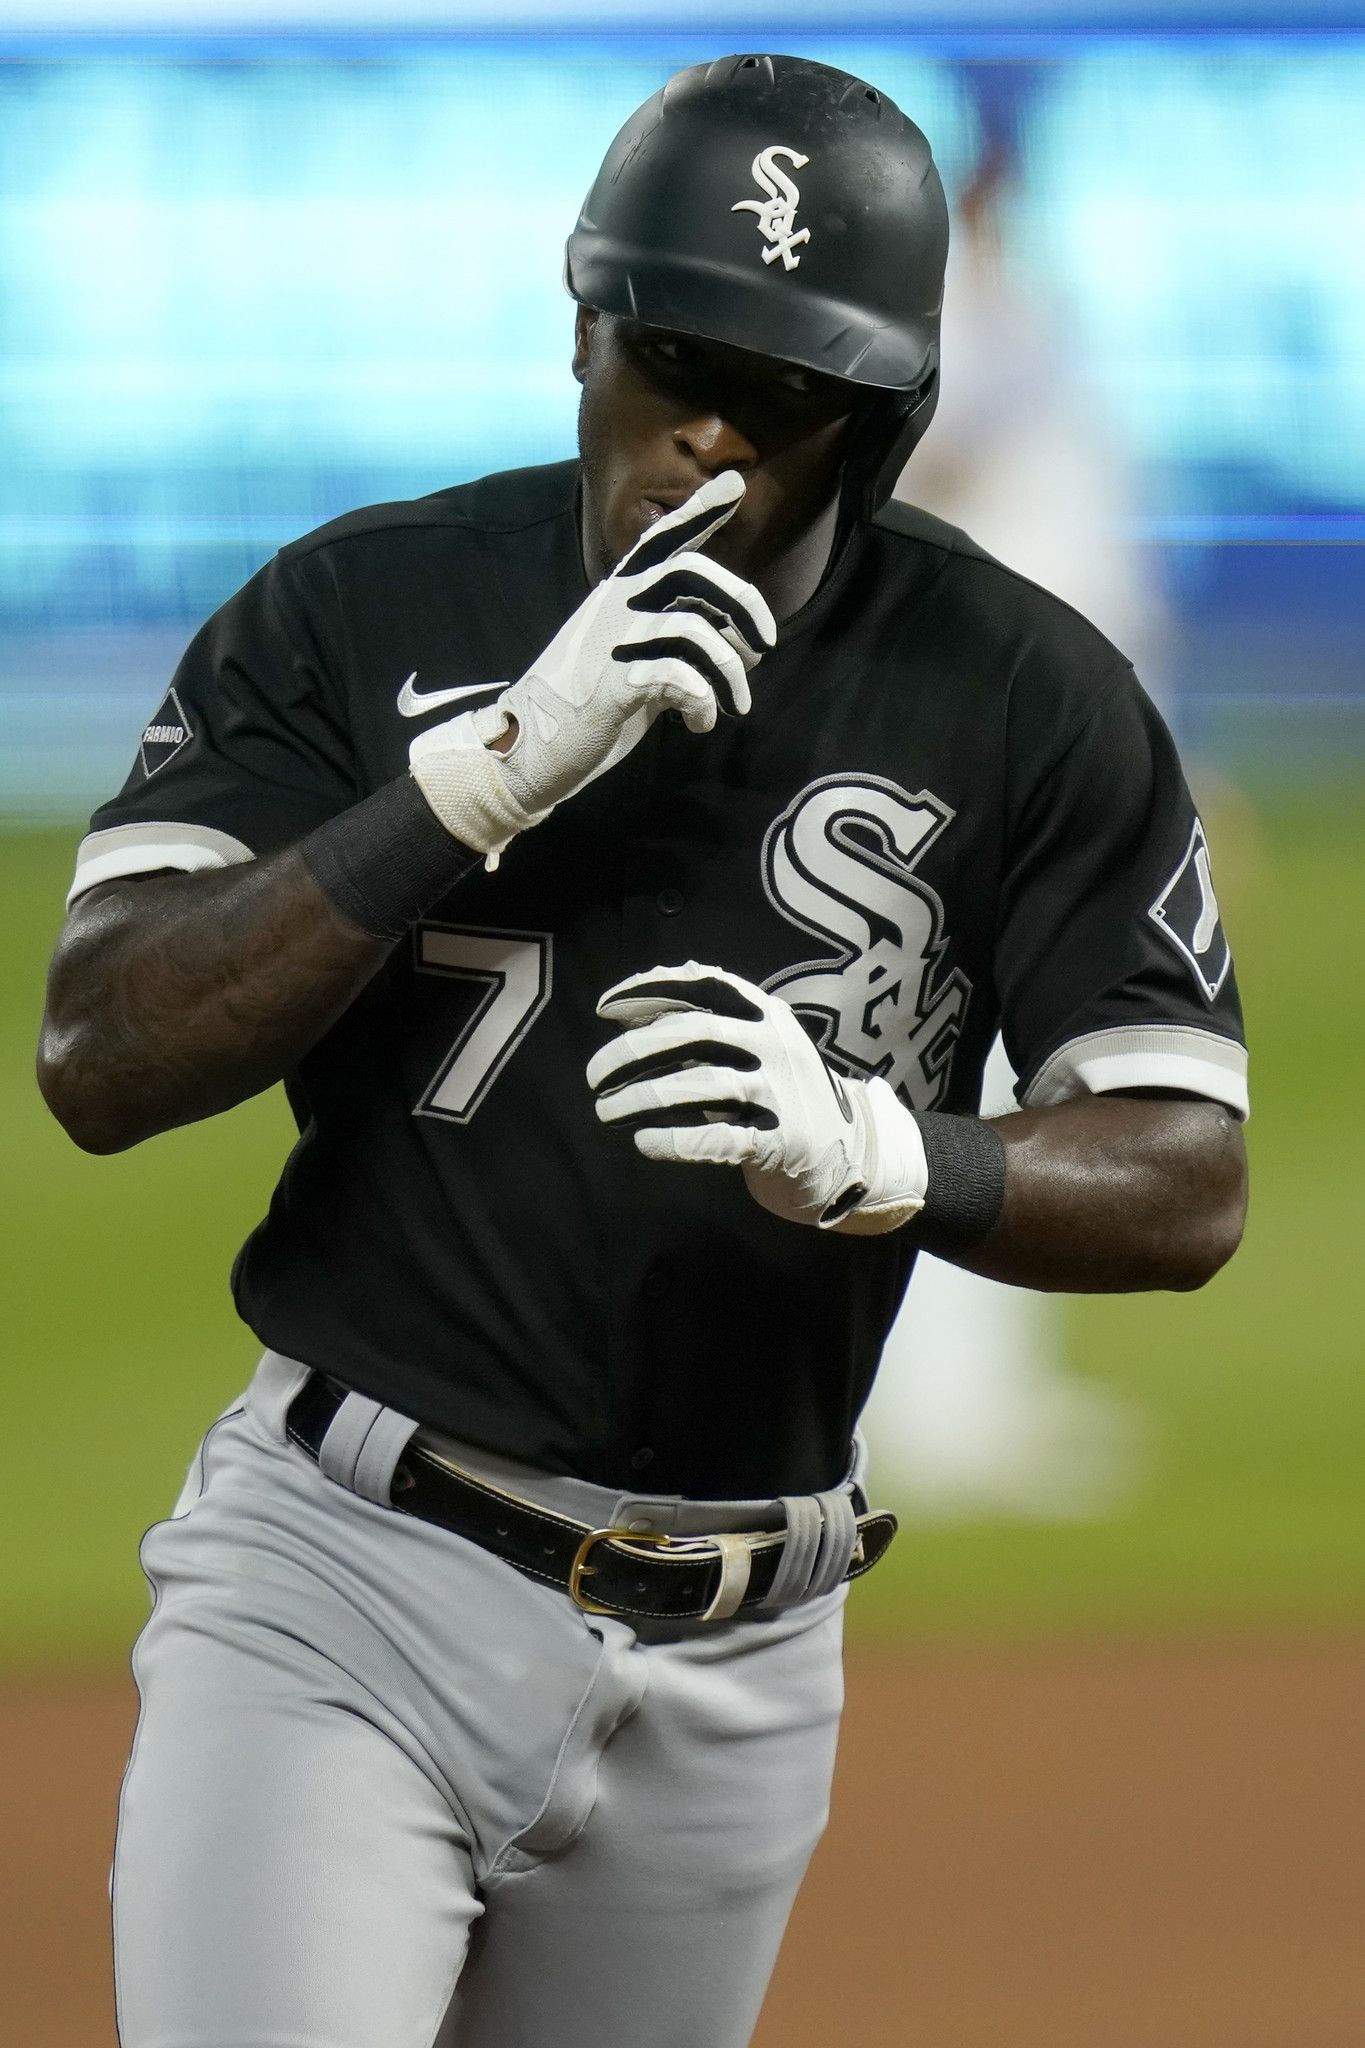 Pro Jersey Sports on X: Look what we got!!! @whitesox rookie center  fielder Luis Robert!!!! The future is here!!!! Come on in and show your Sox  Pride!!!! #whitesox #luisrobert #hahnsight2020 #supportsmallbusiness   /